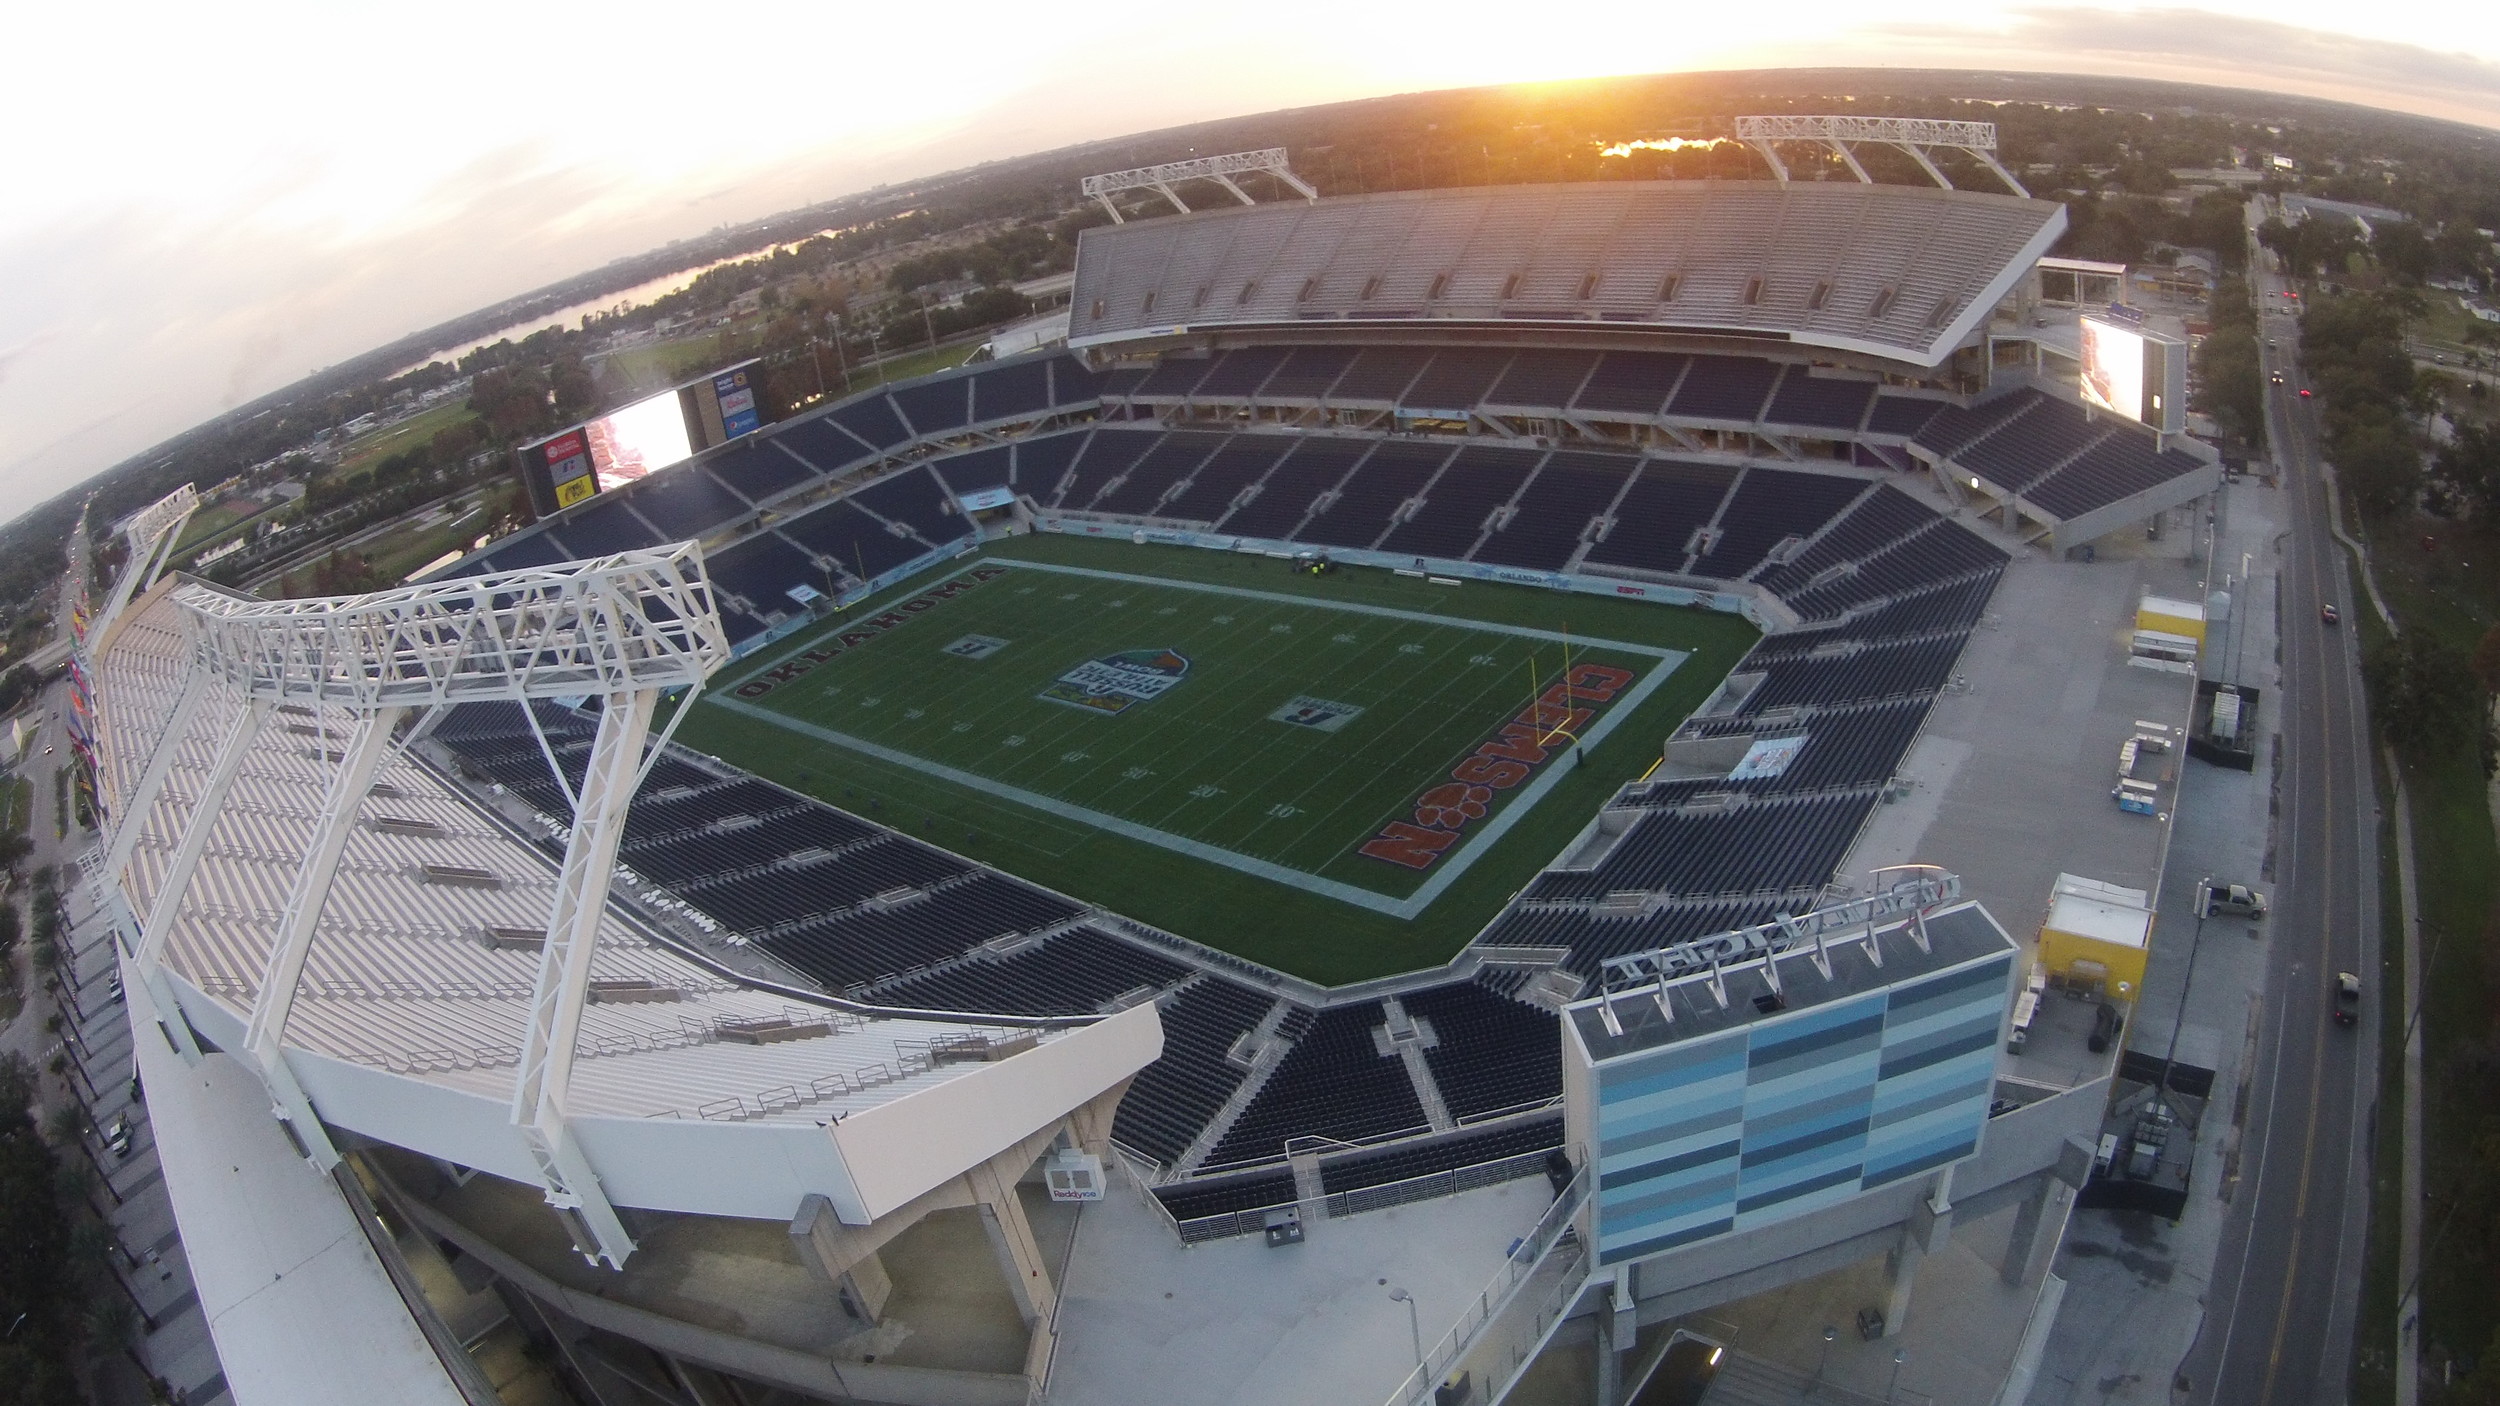 Orlando’s historic Citrus Bowl, now Camping World Stadium, underwent a $207.7 million reconstruction in 2014, re-opening as a state-of-the art venue ready to host world class events. 